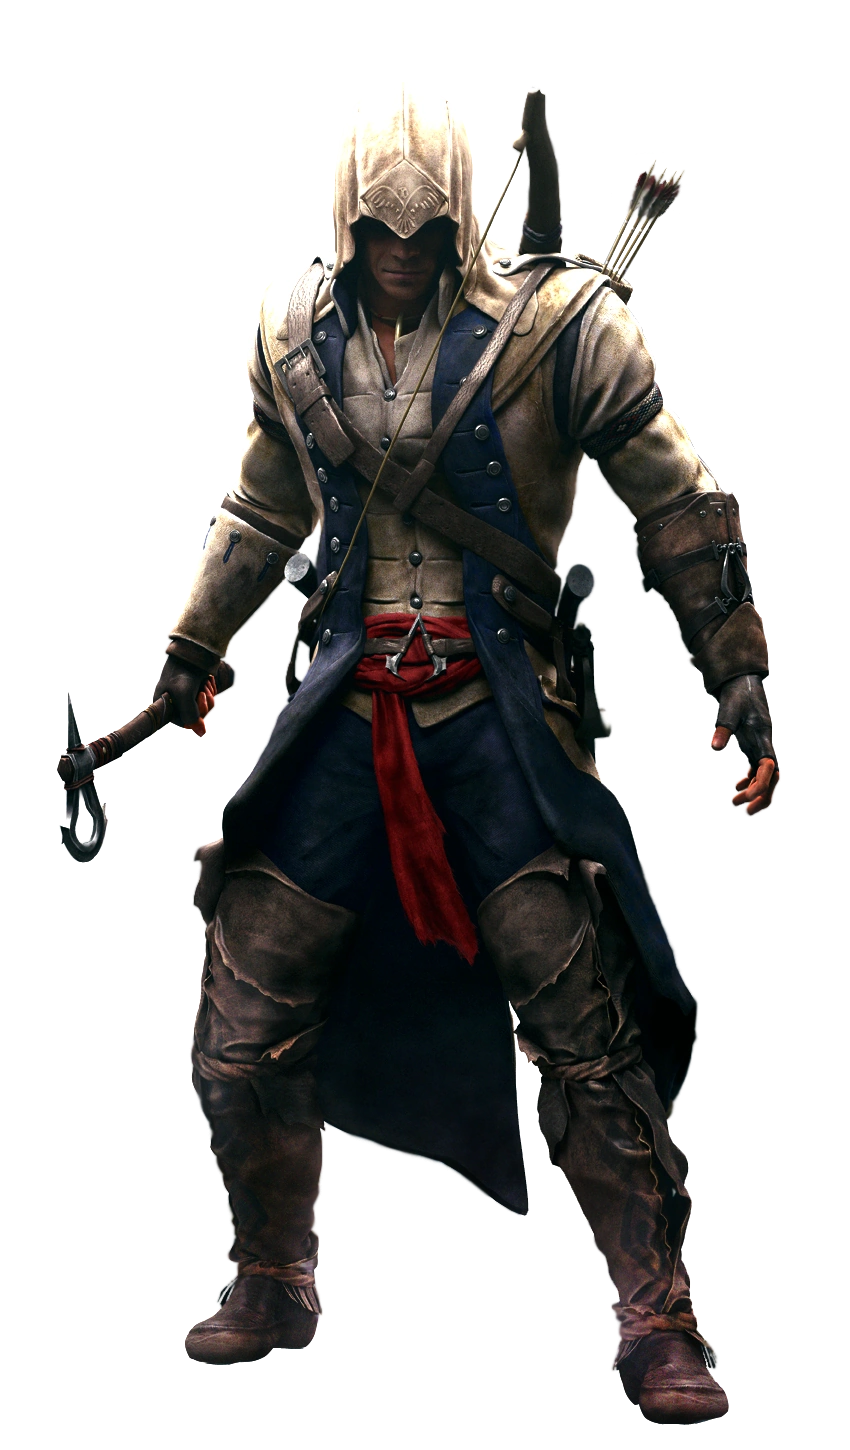 Connor Kenway